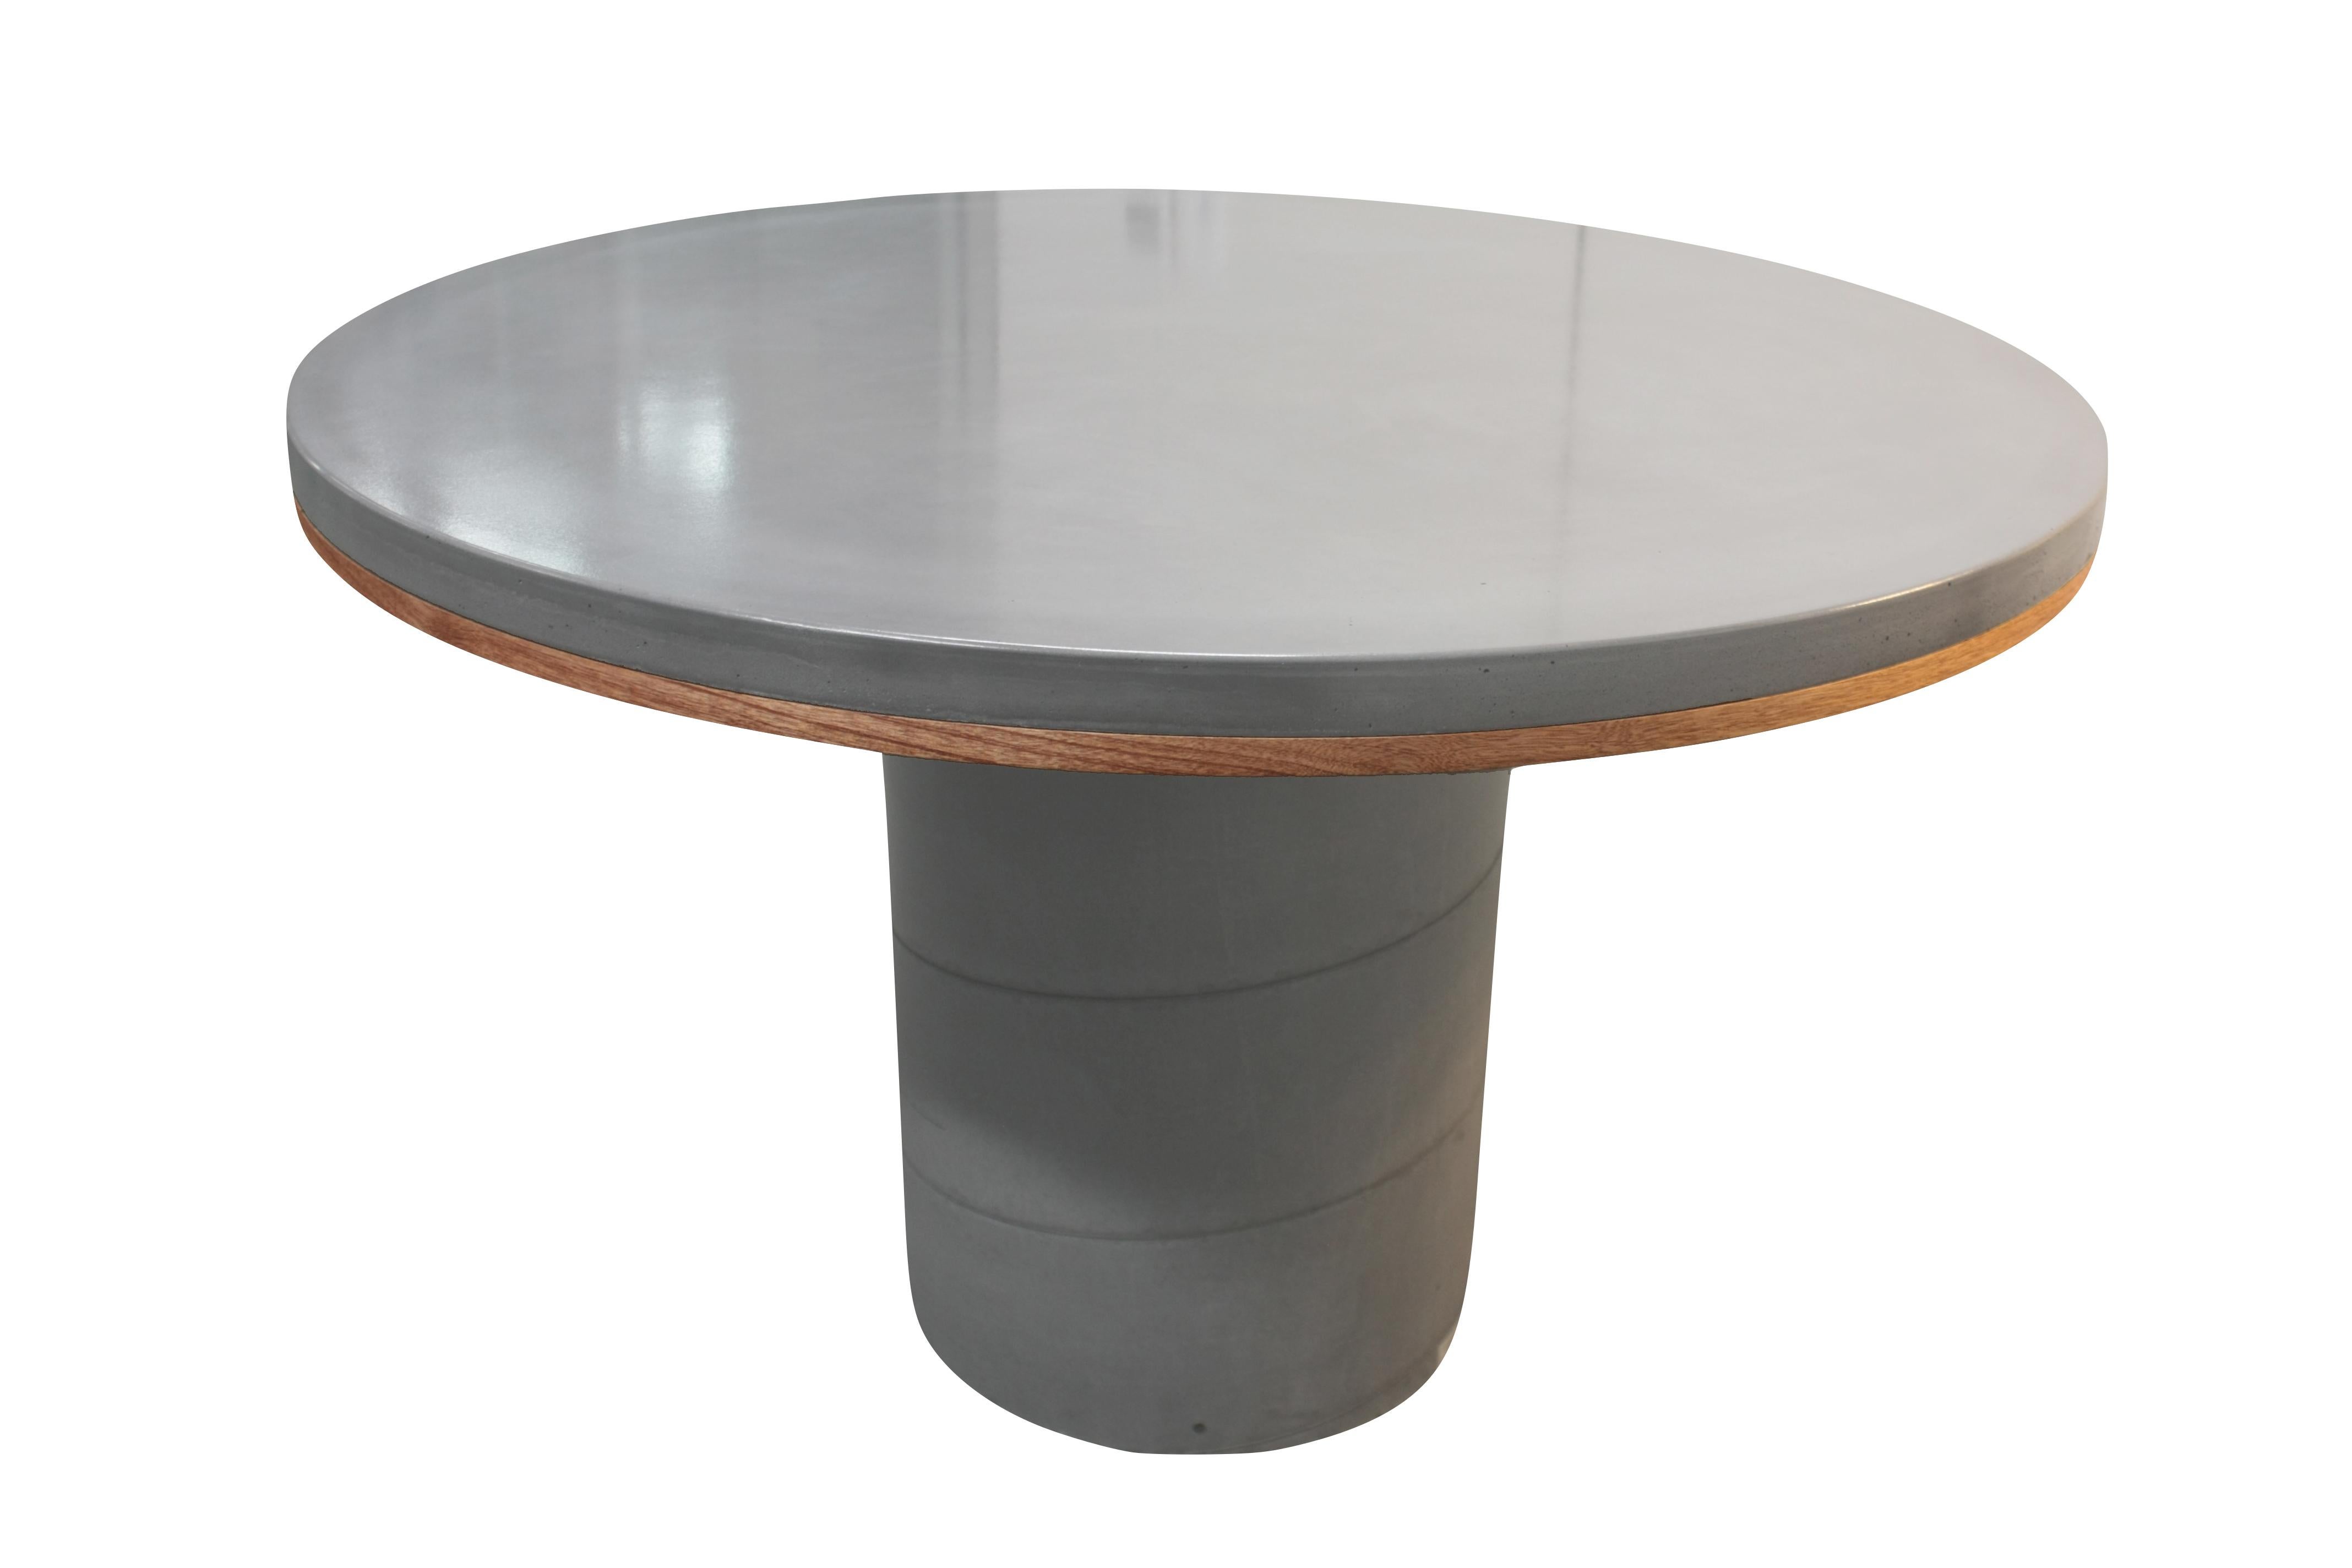 Made to order, made of fiber-glass reinforced Concrete, this dining table brings elegance, simplicity, and brutalism into your area. Inspired by industrial construction. The lightweight high performance concrete is mixed with Fiber-Glass, Making it